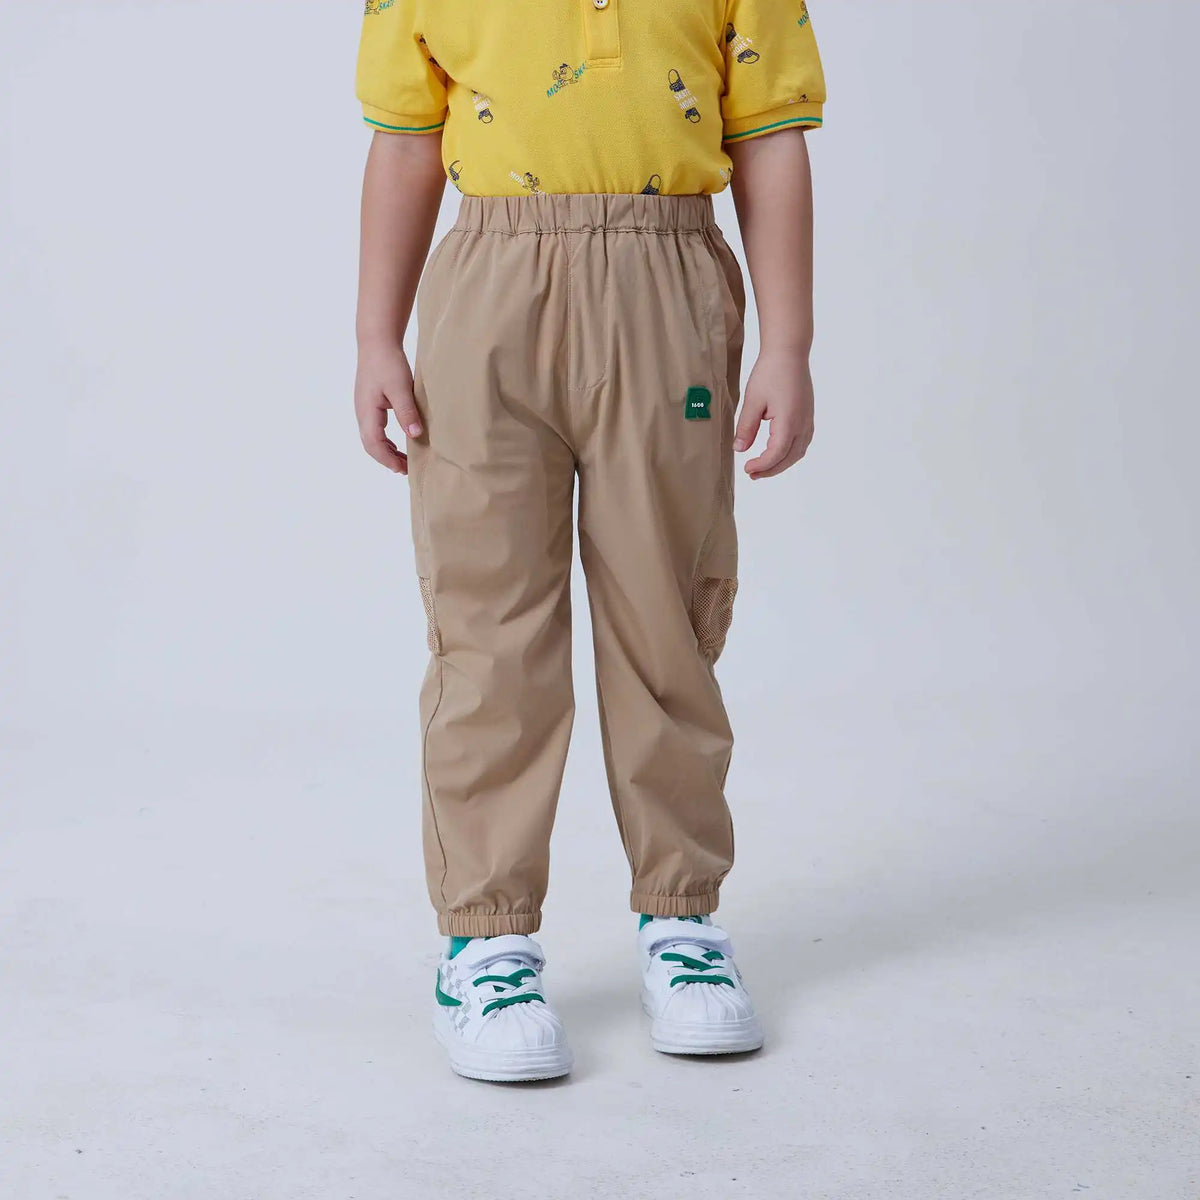 Ankle-Tied Fashion Pants For Boys